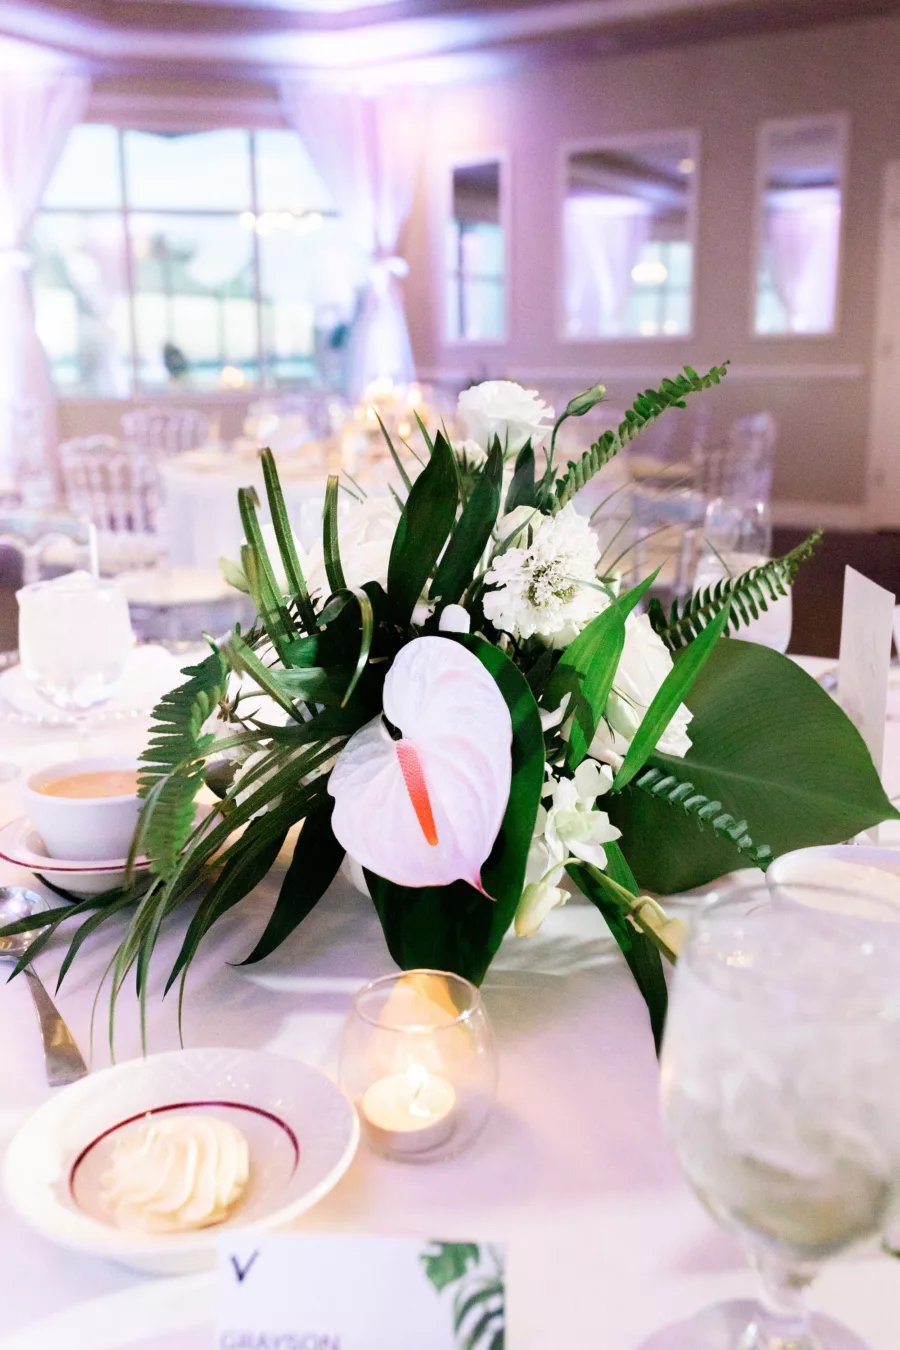 Tropical White Anthurium, Ferns, Palm Leaves and Greenery Wedding Reception Centerpiece Decor Inspiration